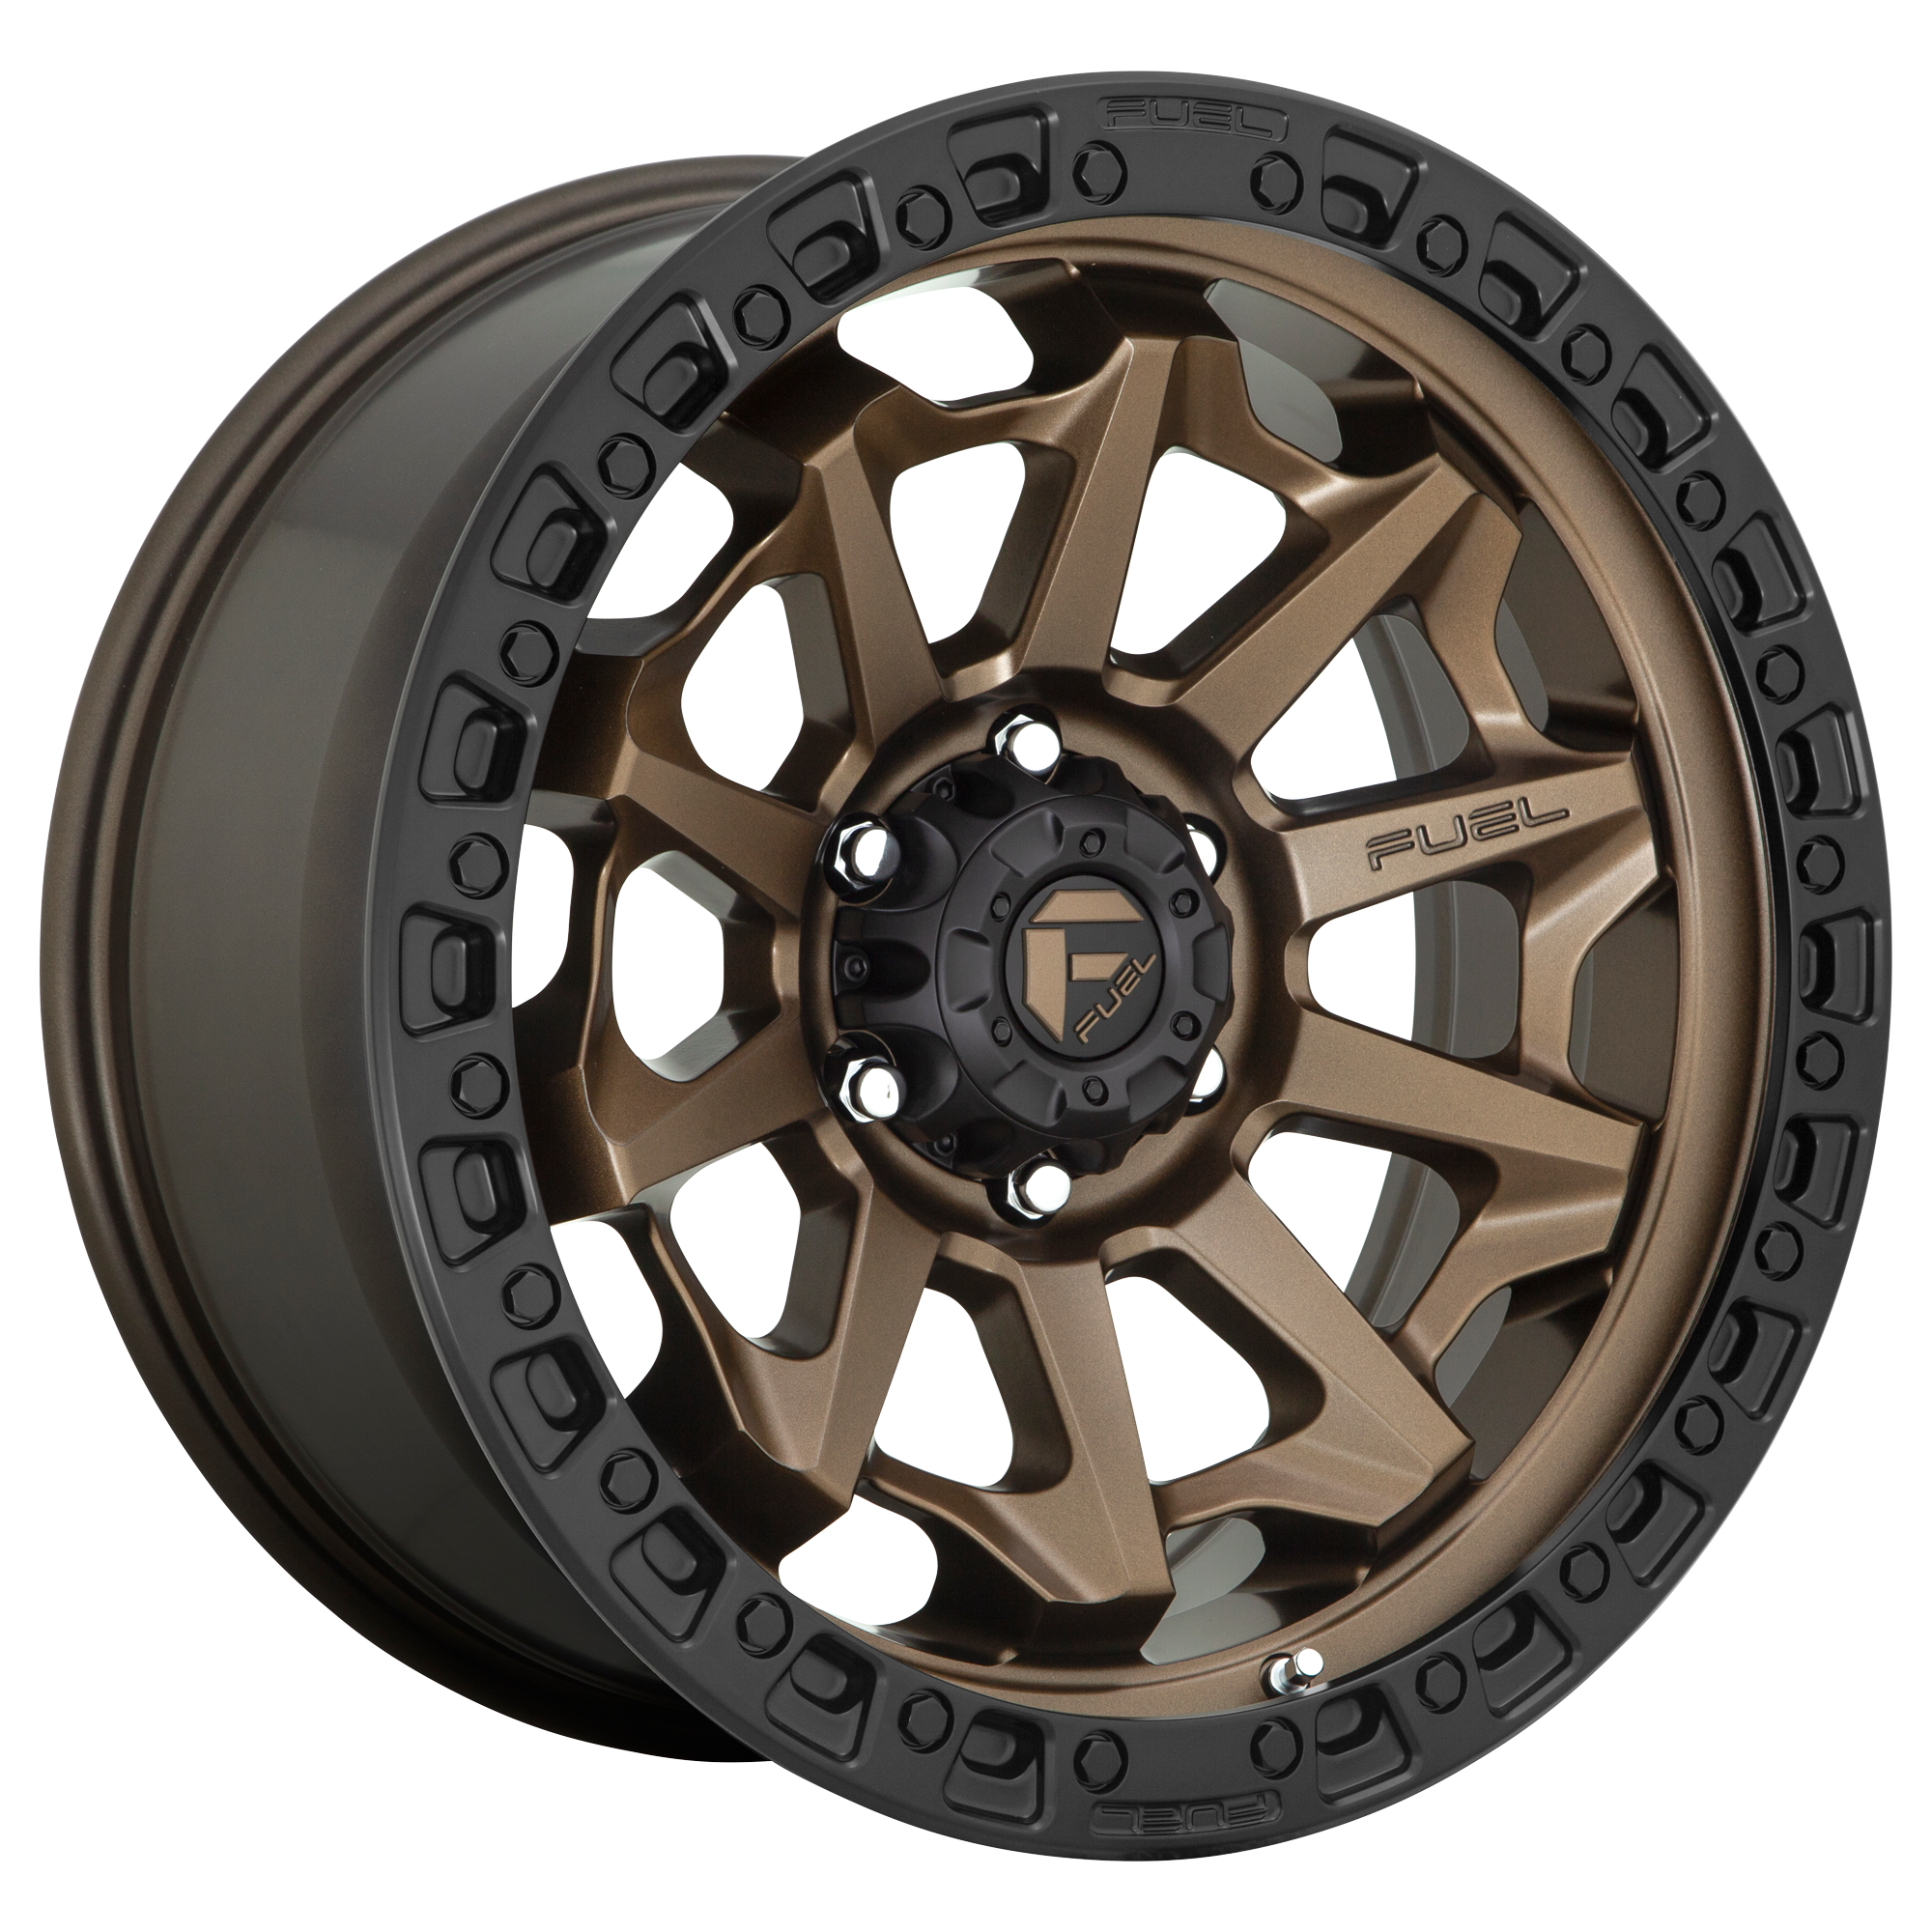 COVERT 18x9 5x150.00 MATTE BRONZE BLACK BEAD RING (20 mm) - Tires and Engine Performance